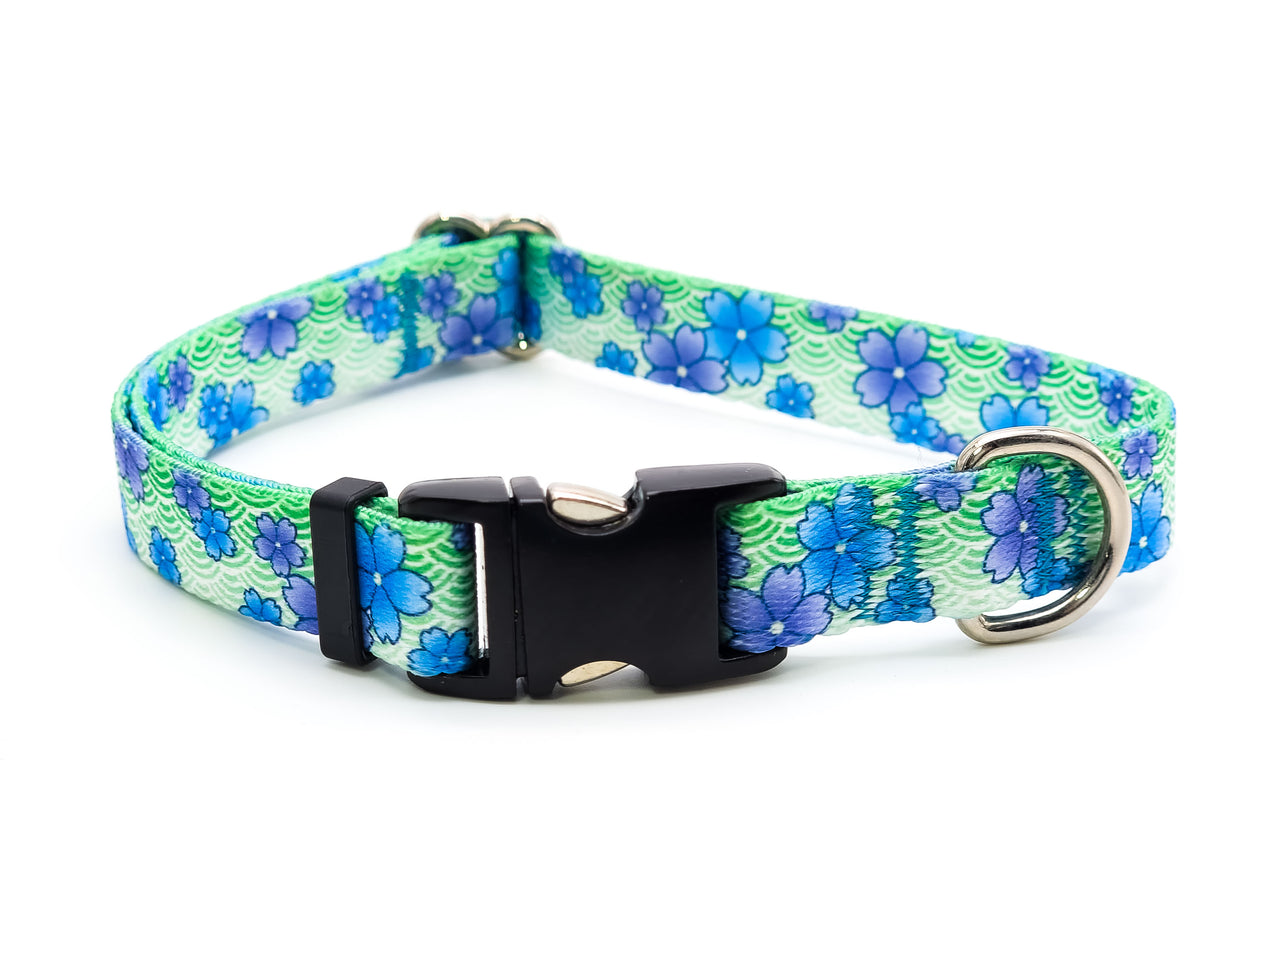 April Blossoms | Flat Side Release Collar | Medium 11"-17" in 5/8" wide